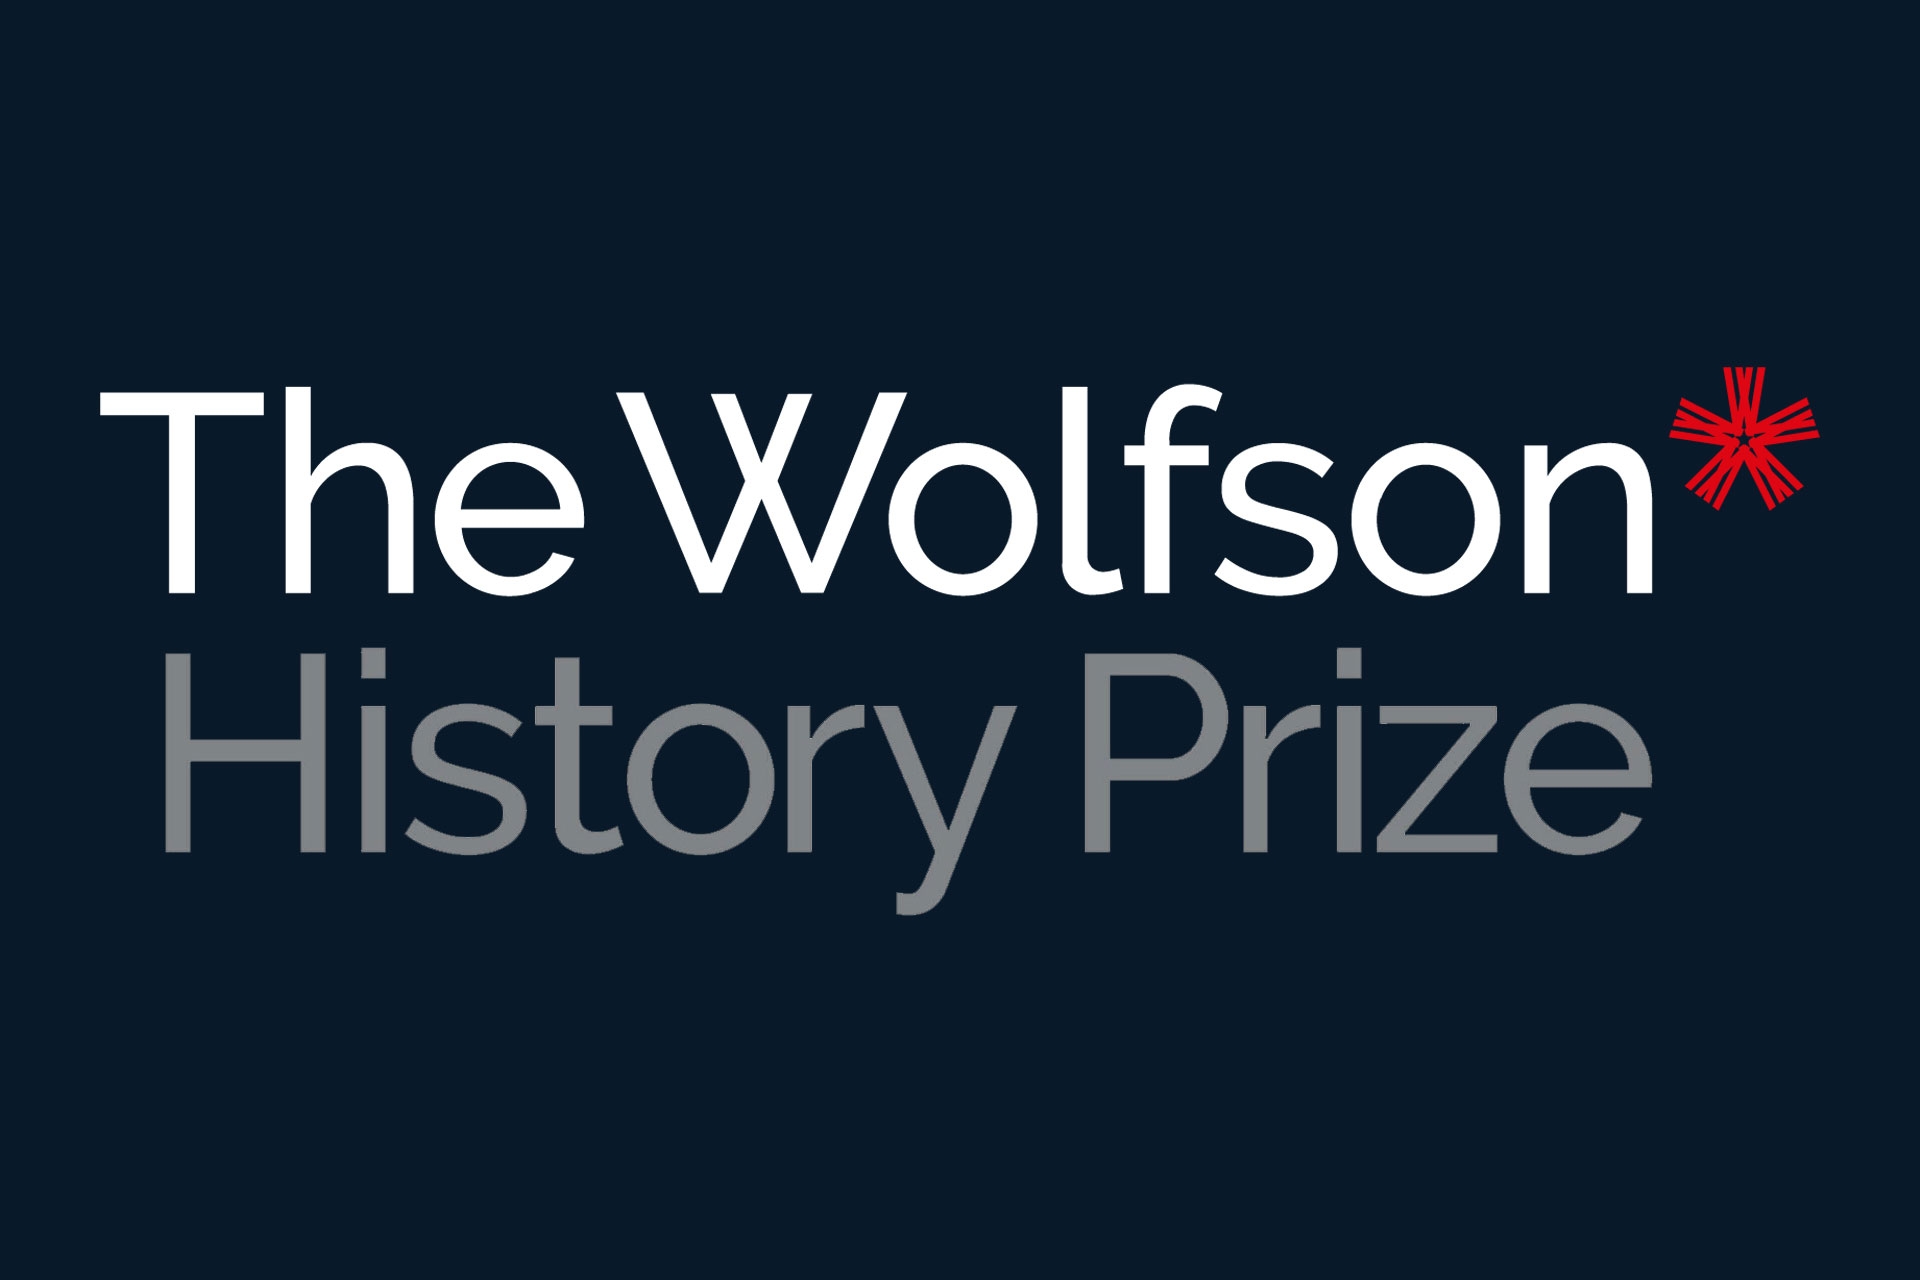 The Wolfson History Prize